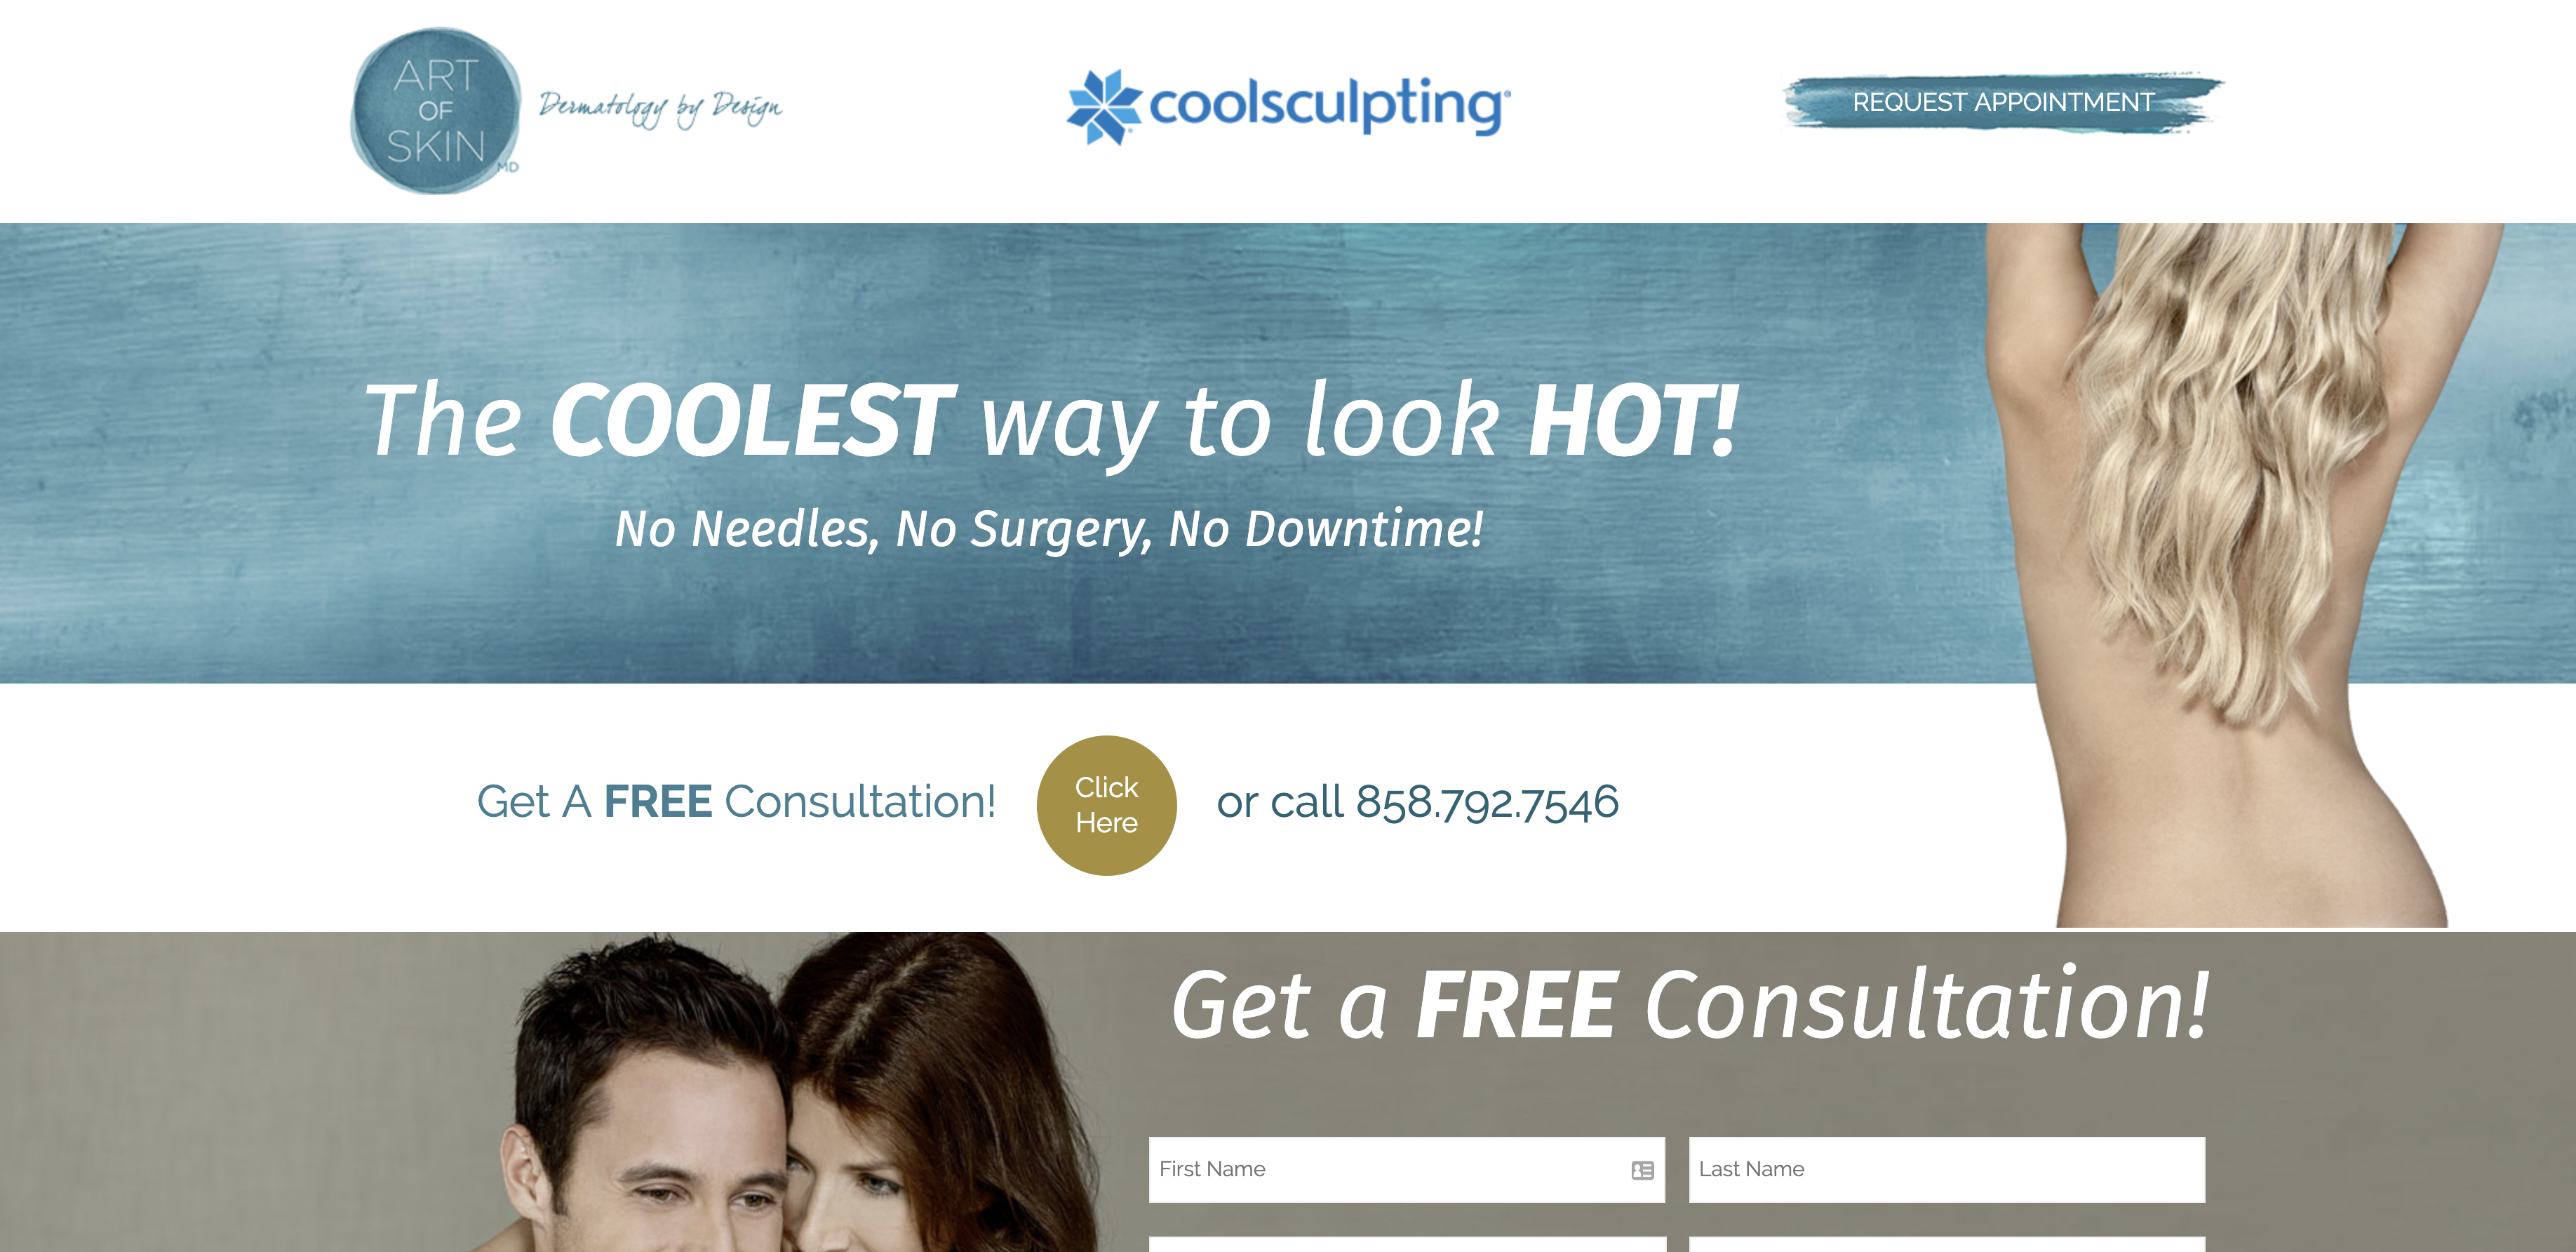 Coolsculpting Landing Page for Art of Skin MD, Sand Diego, CA